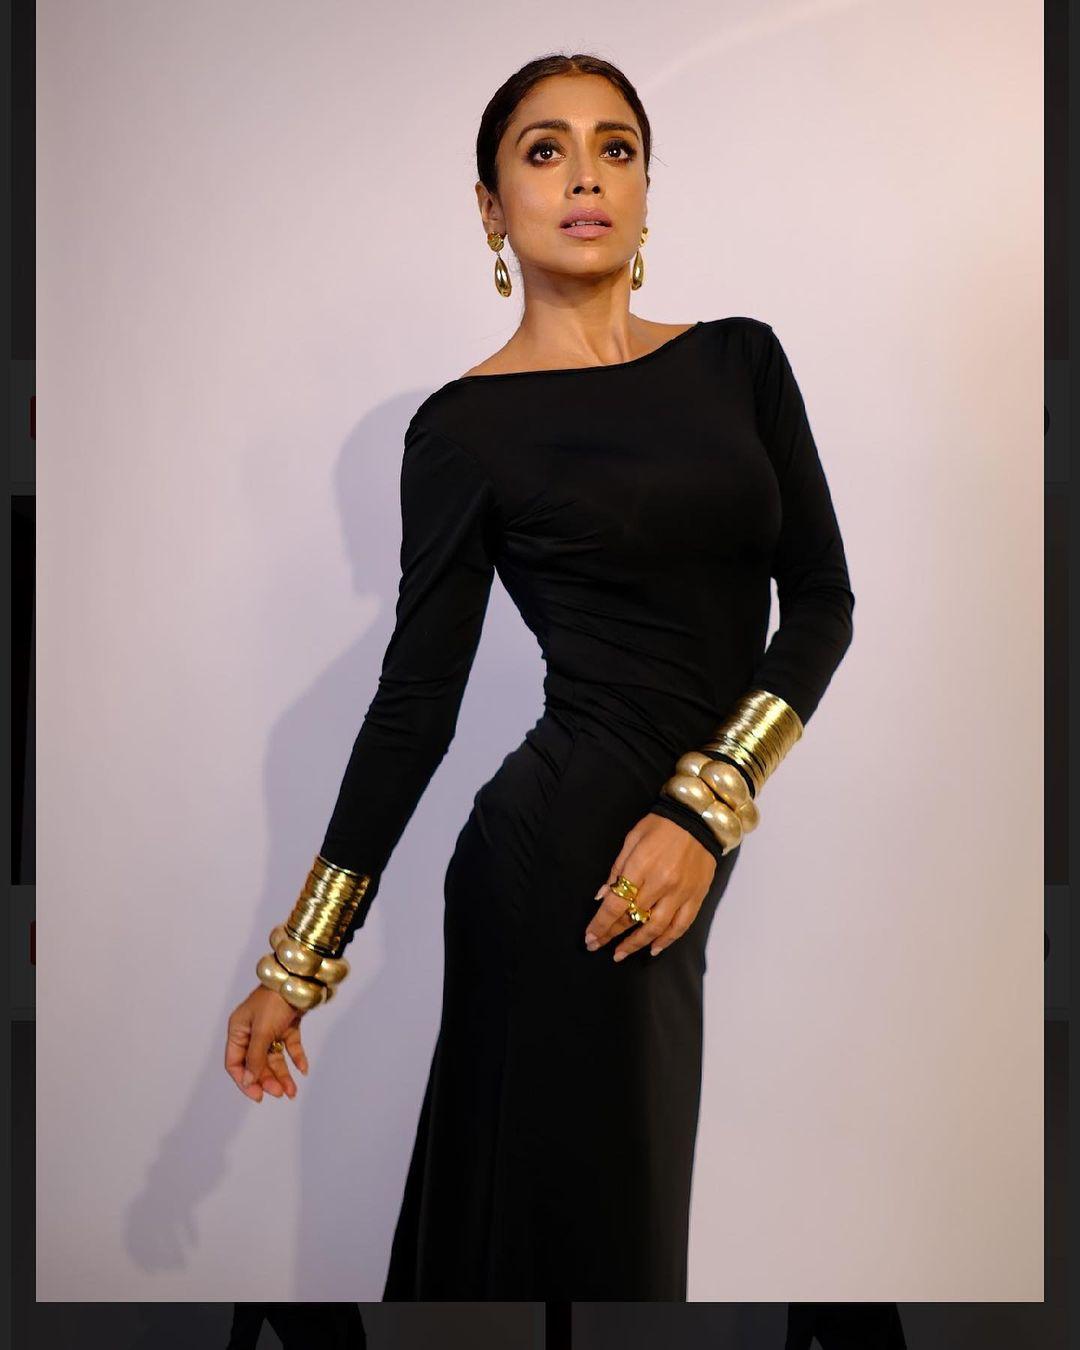 You can never go wrong with a black dress, and Shriya Saran proves that in this ensemble!